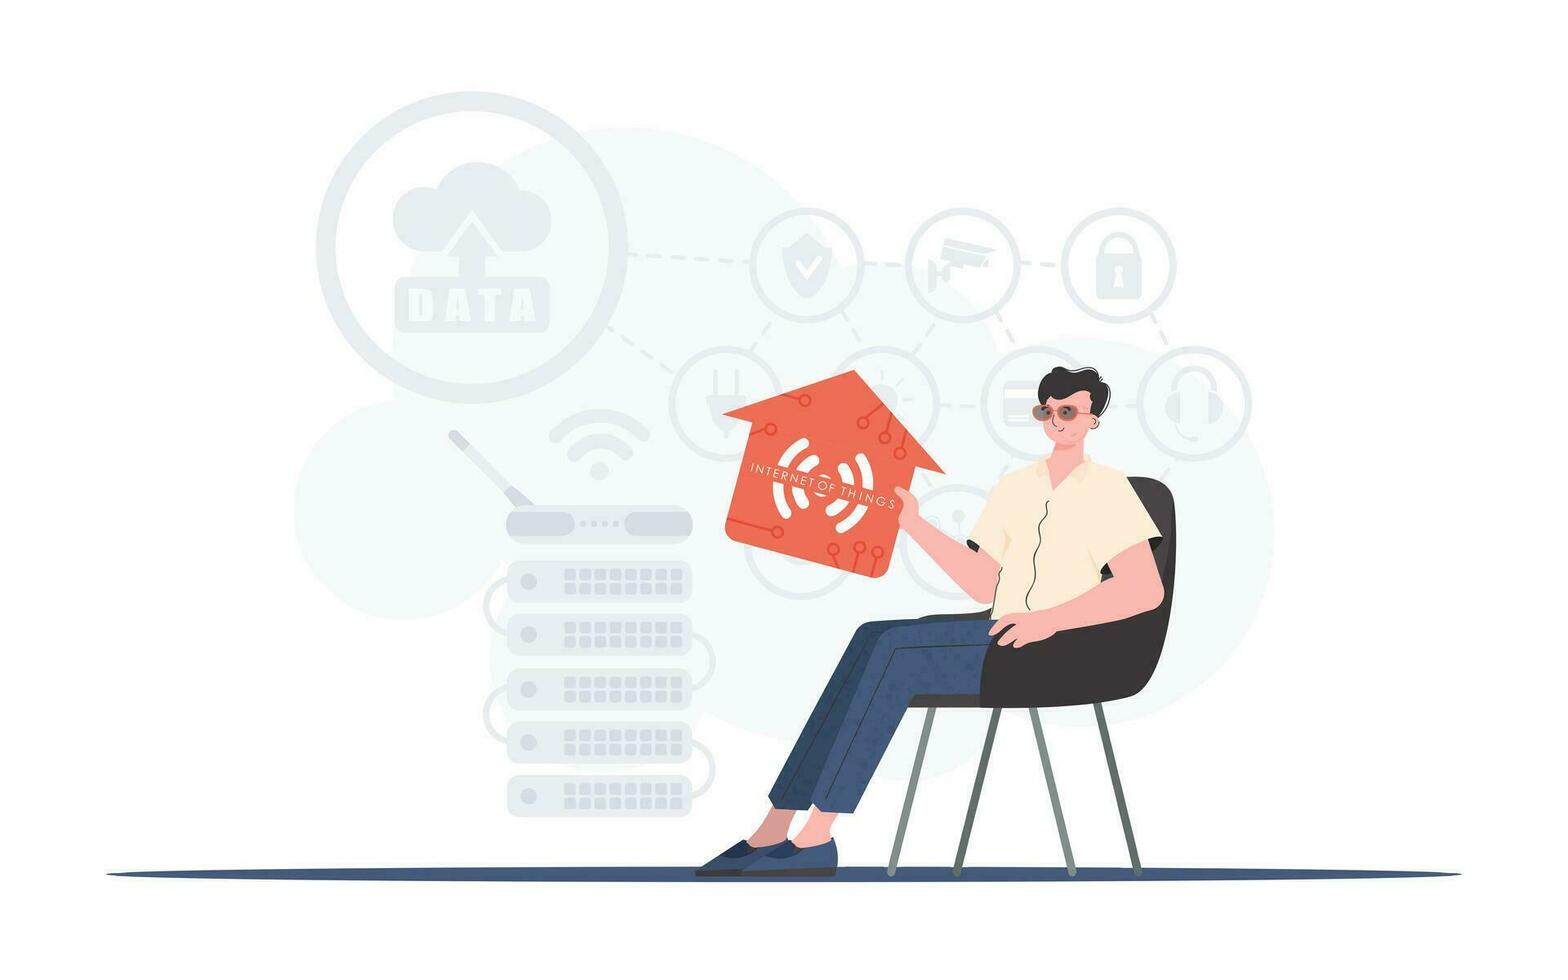 Internet of things concept. A man sits in an armchair and holds a house icon in his hands. Good for presentations. Vector illustration in trendy flat style.